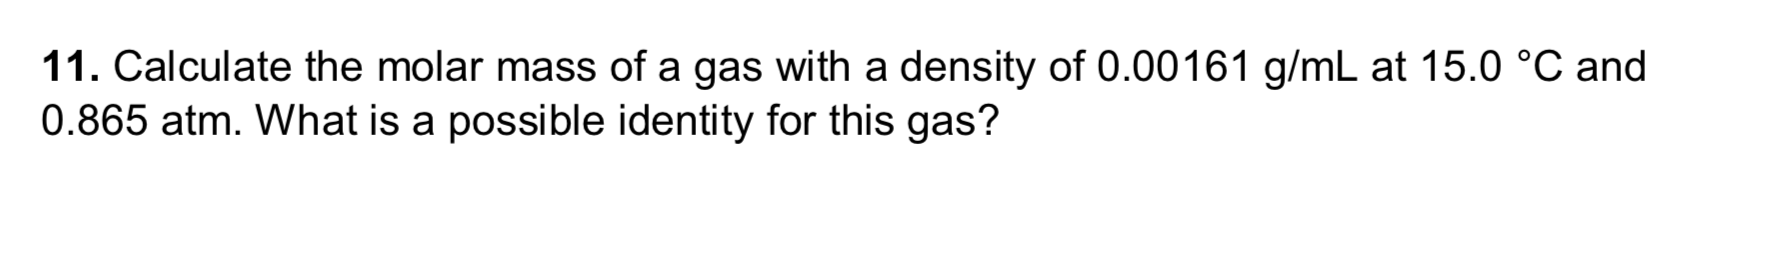 11. Calculate the molar mass of a gas with a density of 0.00161 g/mL at 15.0 °C and
0.865 atm. What is a possible identity for this gas?
